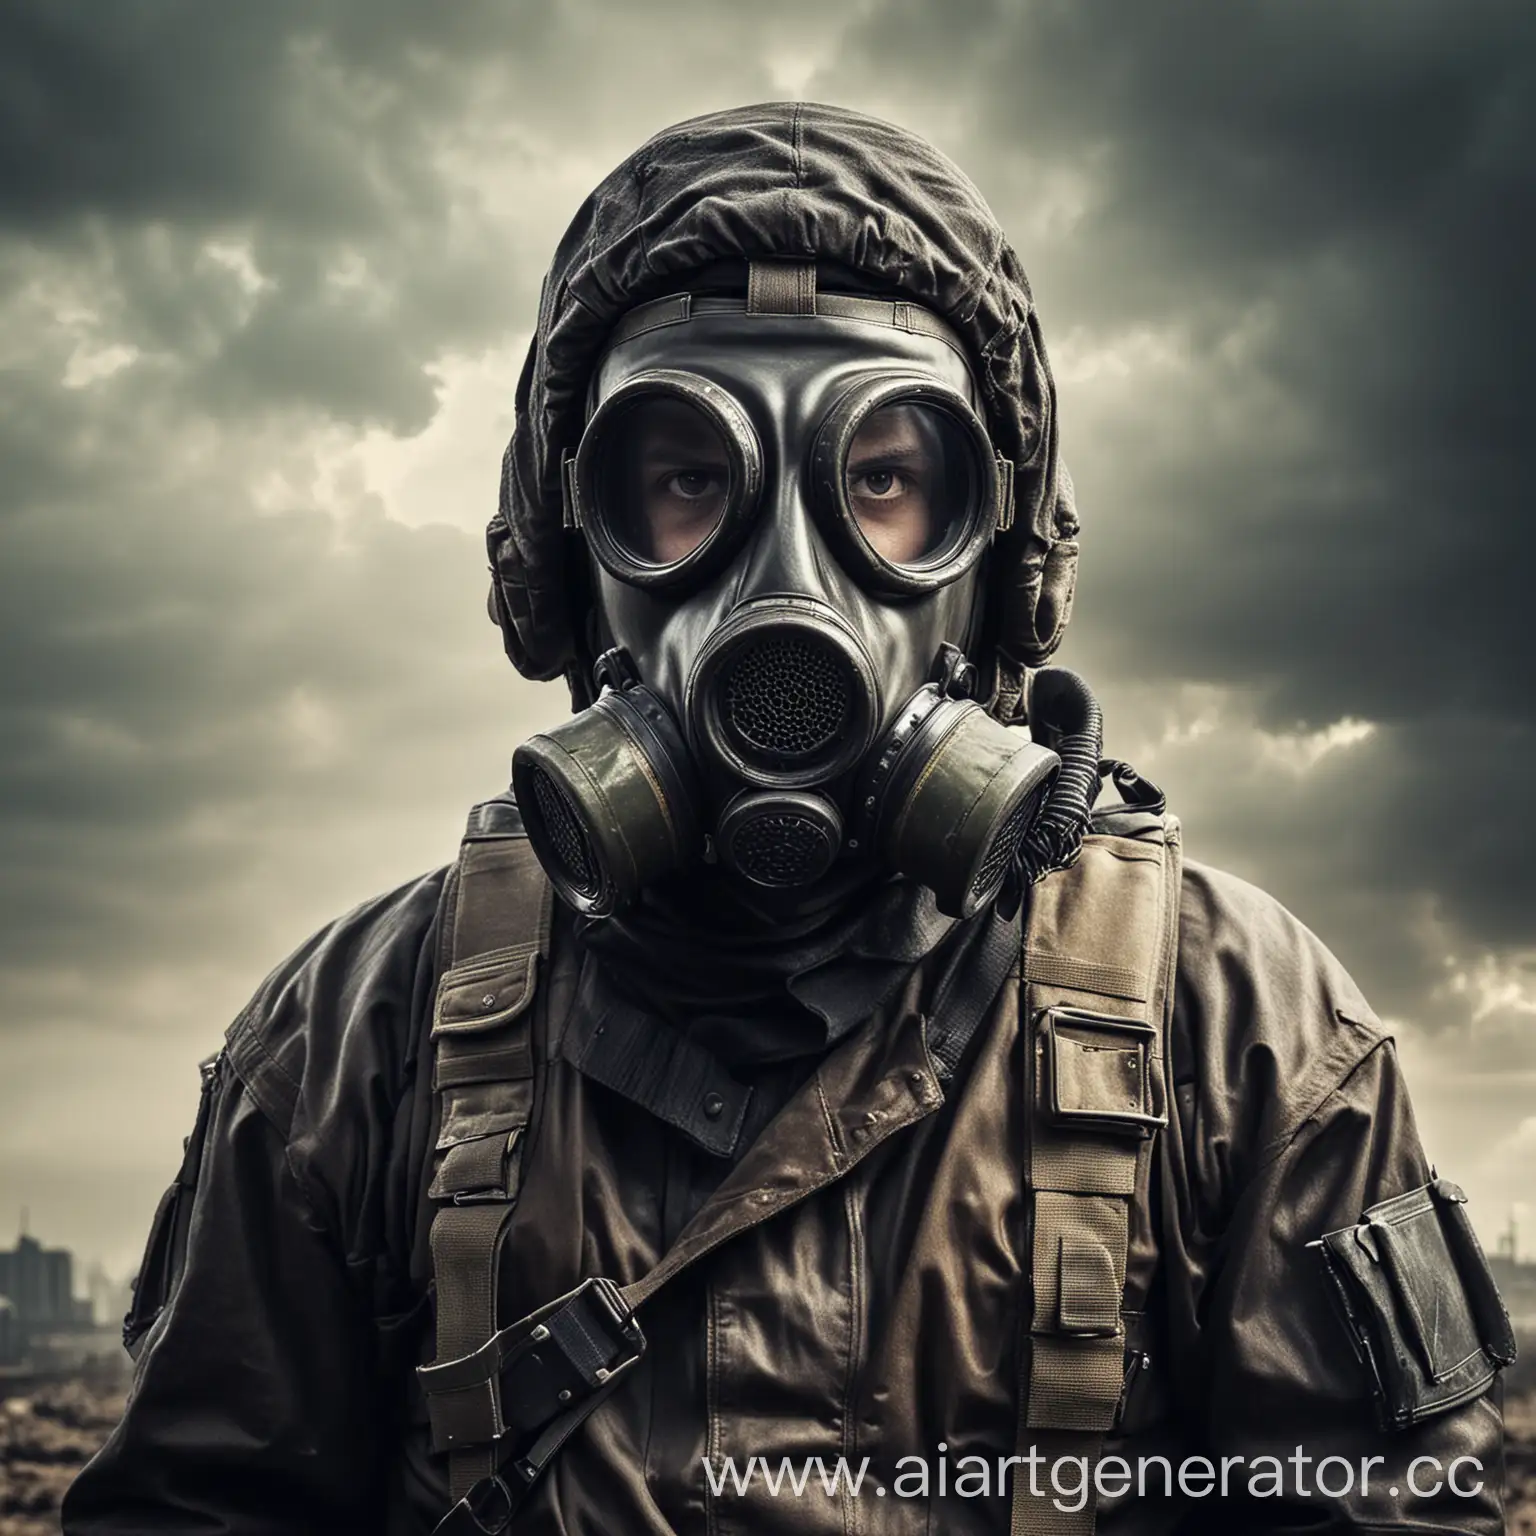 Post nuclear apocalyptic atmosphere, a man wearing bulky protective gear with a gasmask